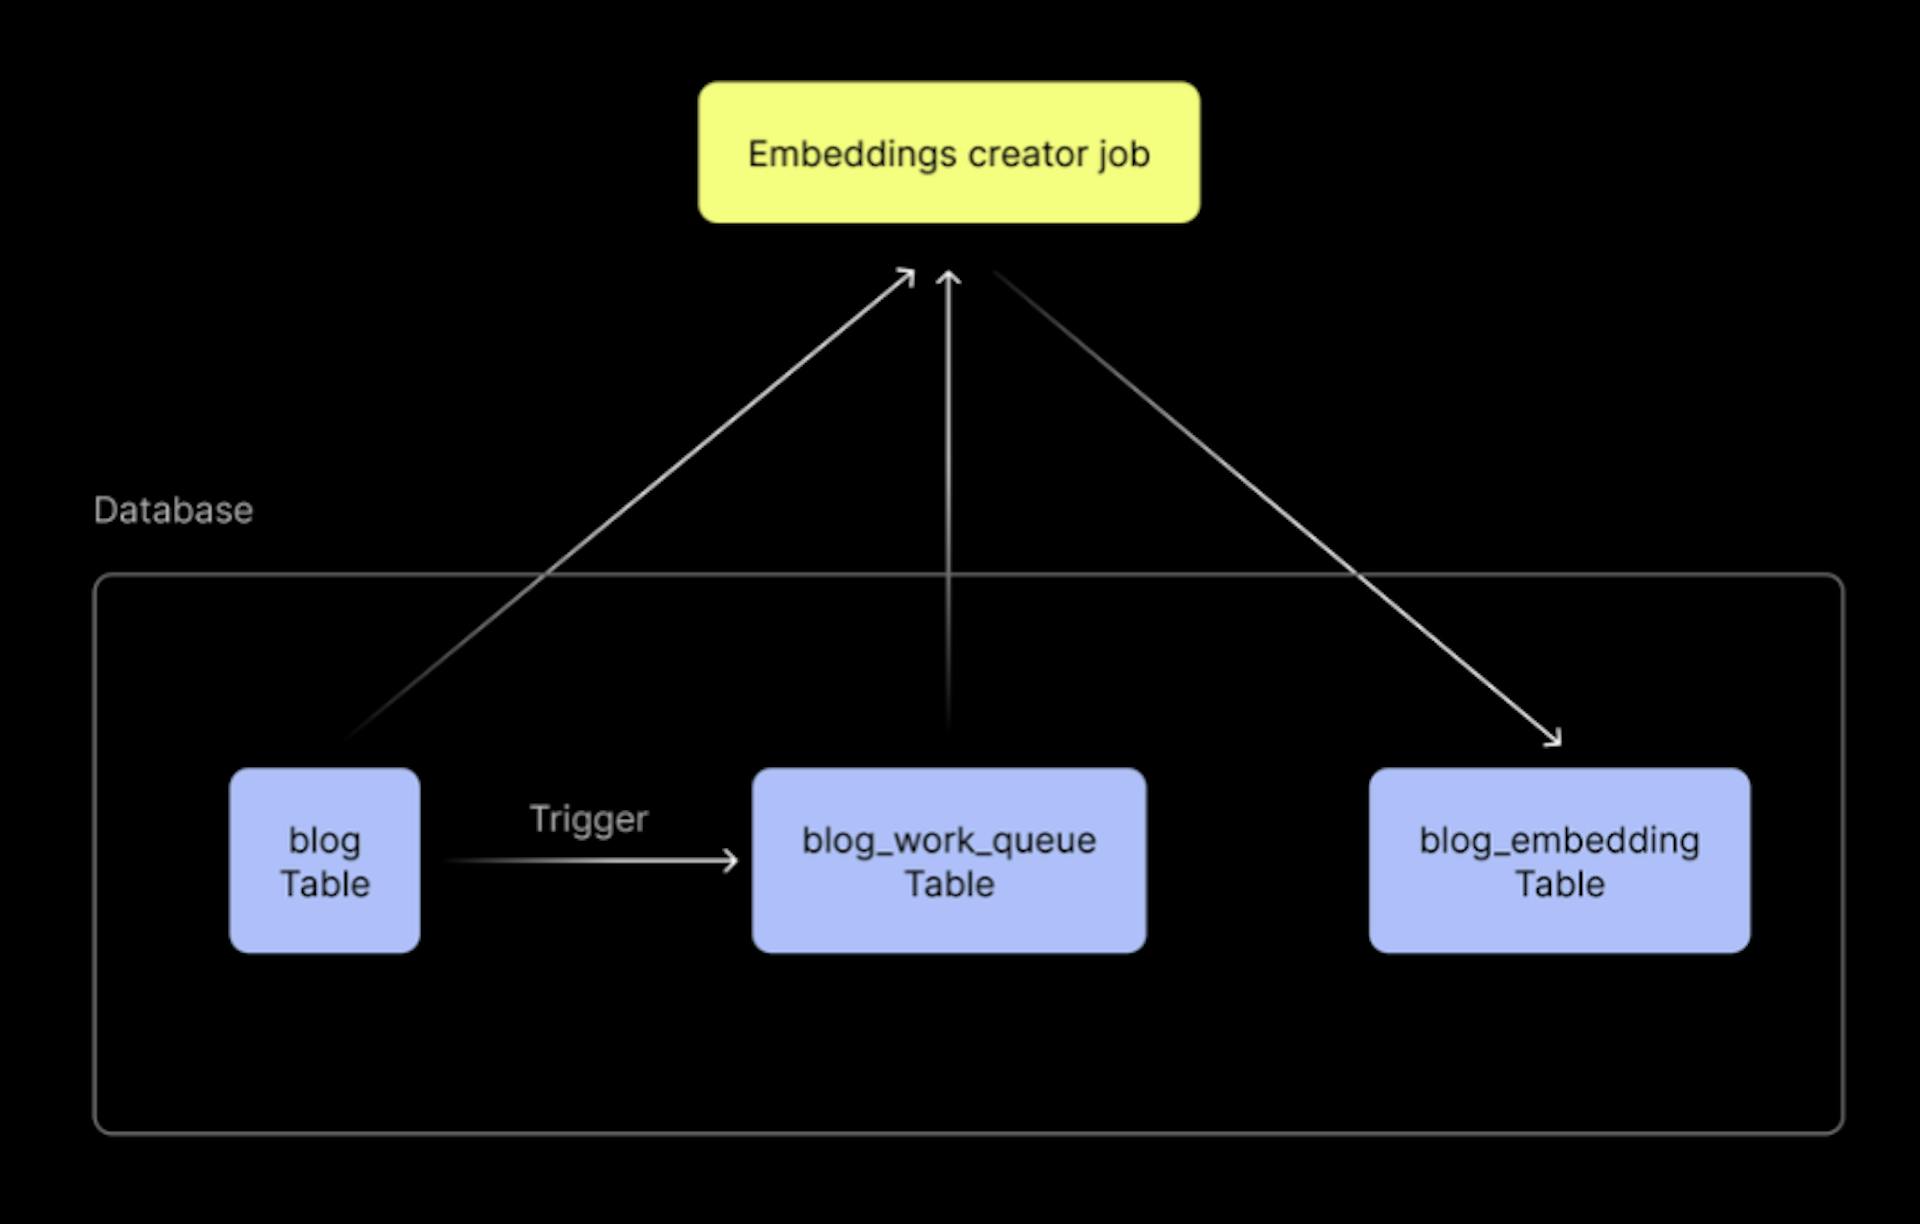 Reference architecture for a simple and resilient system for embedding data in an existing PostgreSQL table. We use the example use case of a blogging application, hence the table names above.